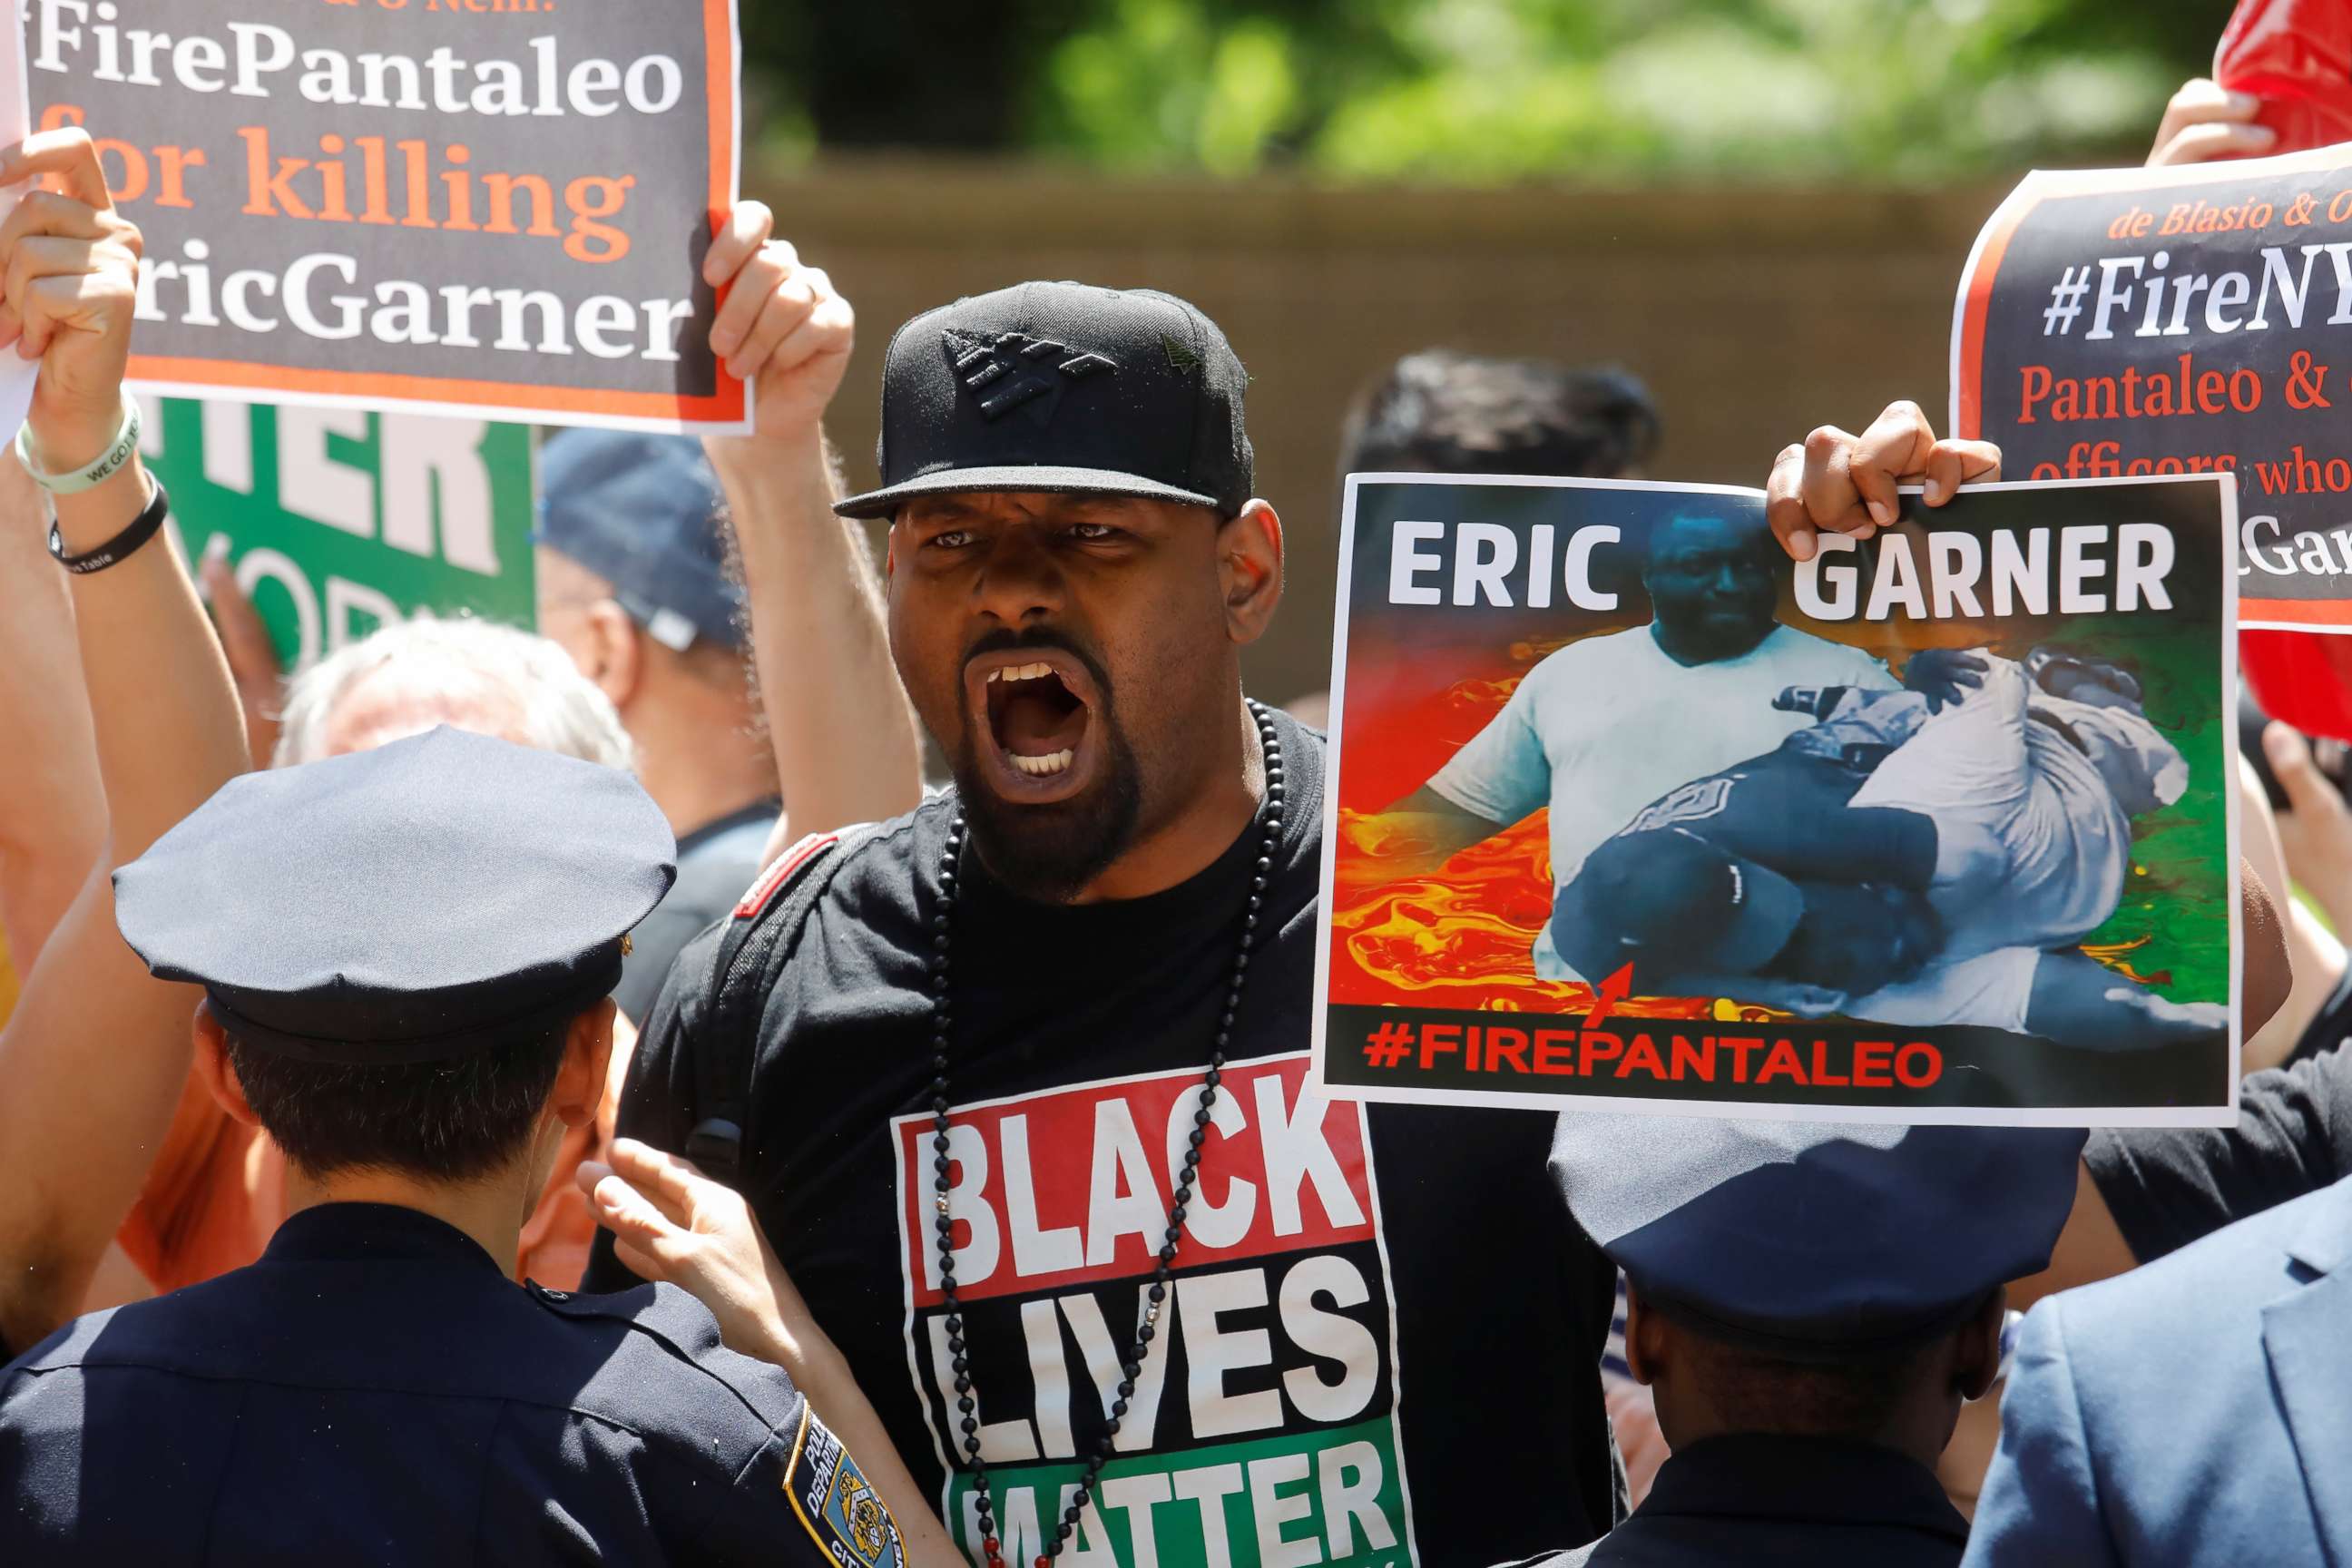 PHOTO: Demonstrators protest during the disciplinary trial of police officer Daniel Pantaleo in relation to the death of Eric Garner at 1 Police Plaza in New York June 6, 2019.